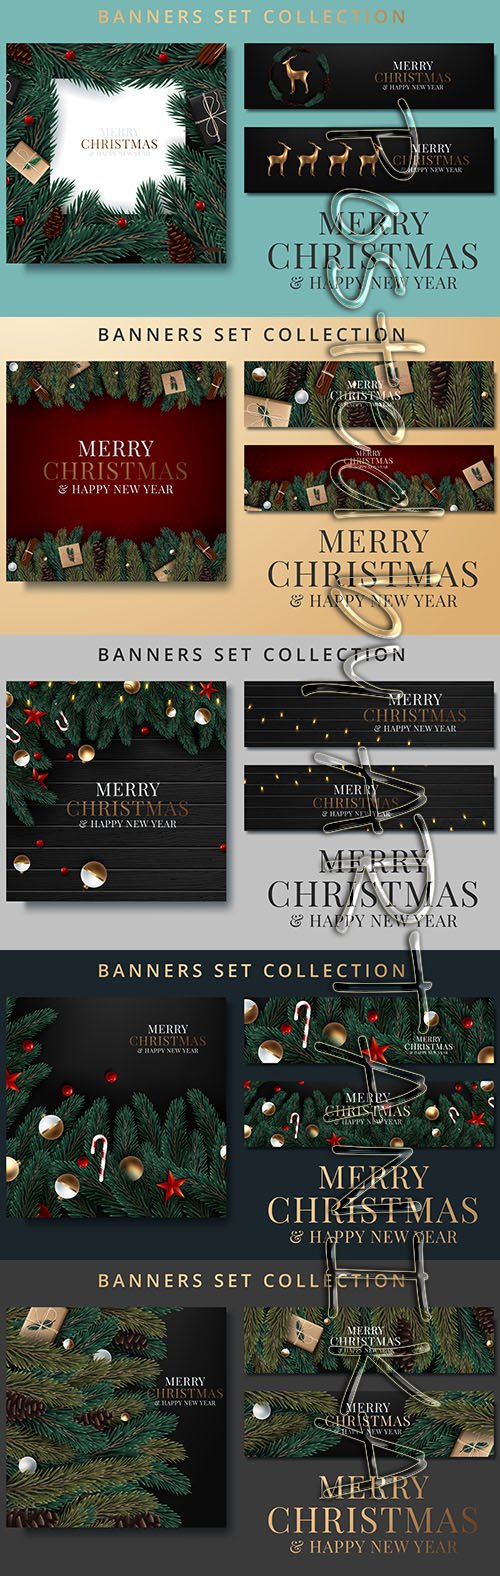 Collections of Christmas Decorated Banners